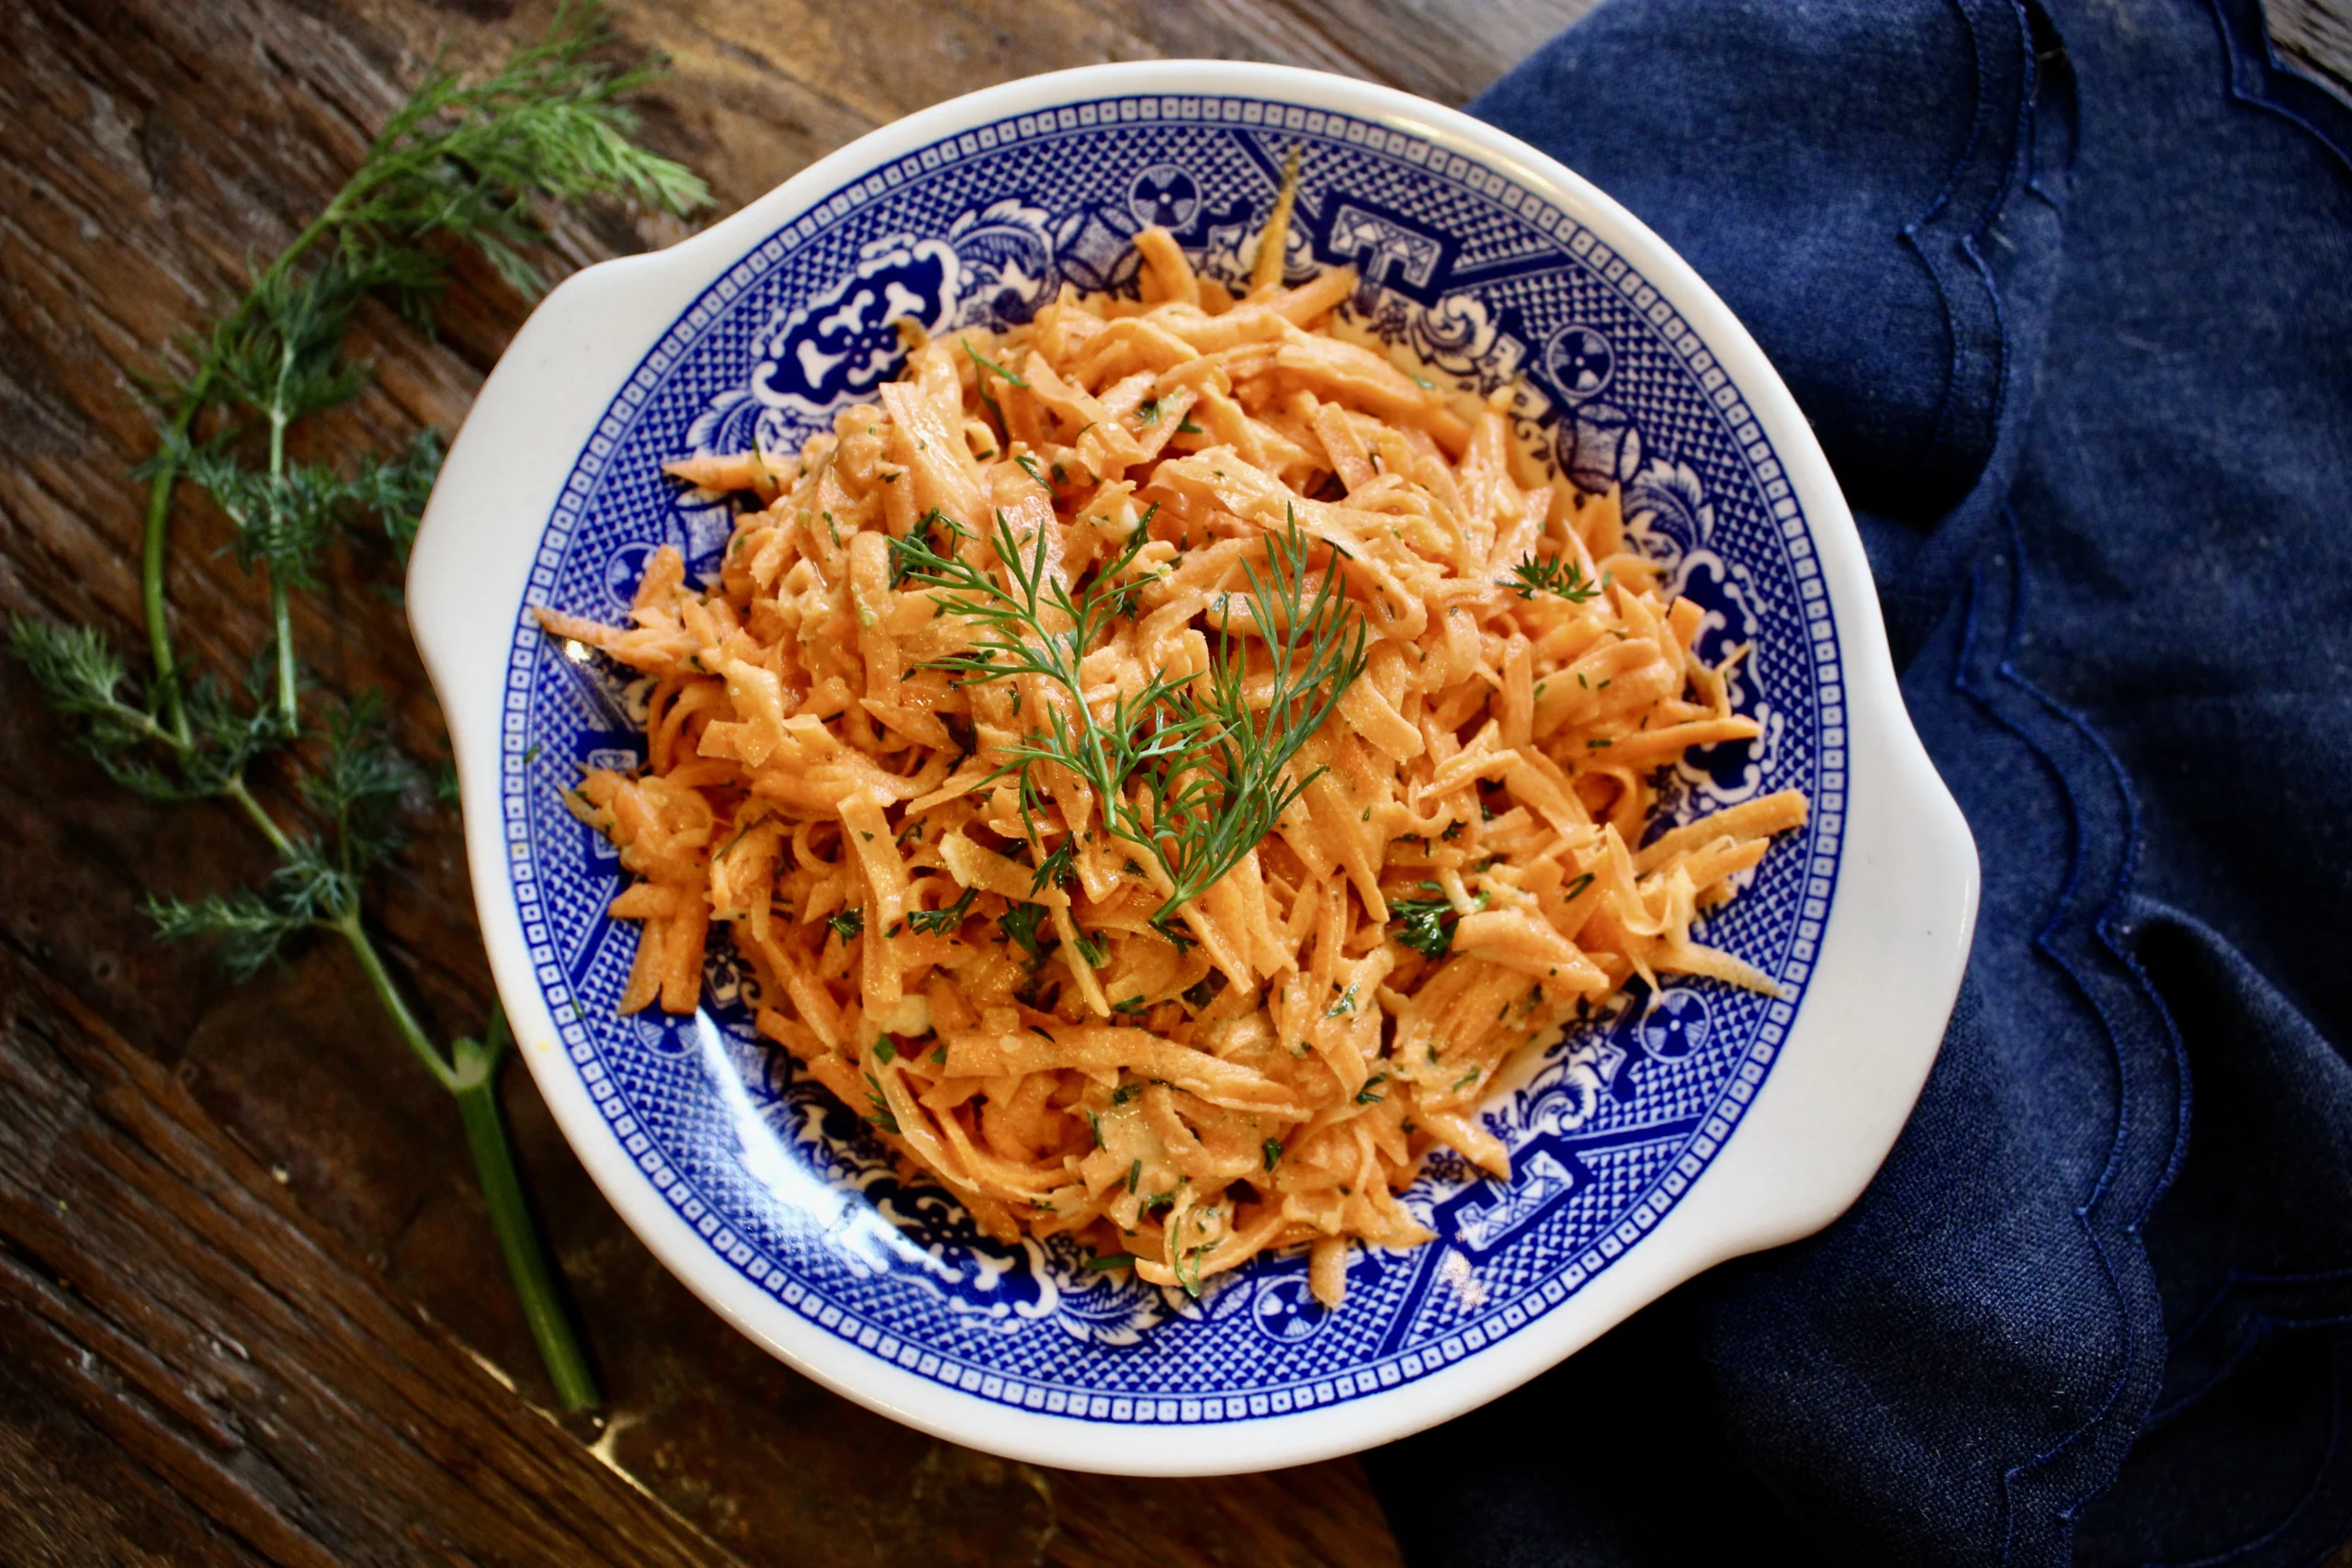 Carrot Slaw with an Herby Tahini Dressing - super easy and so delicious! Perfect for weeknights and meal prep.